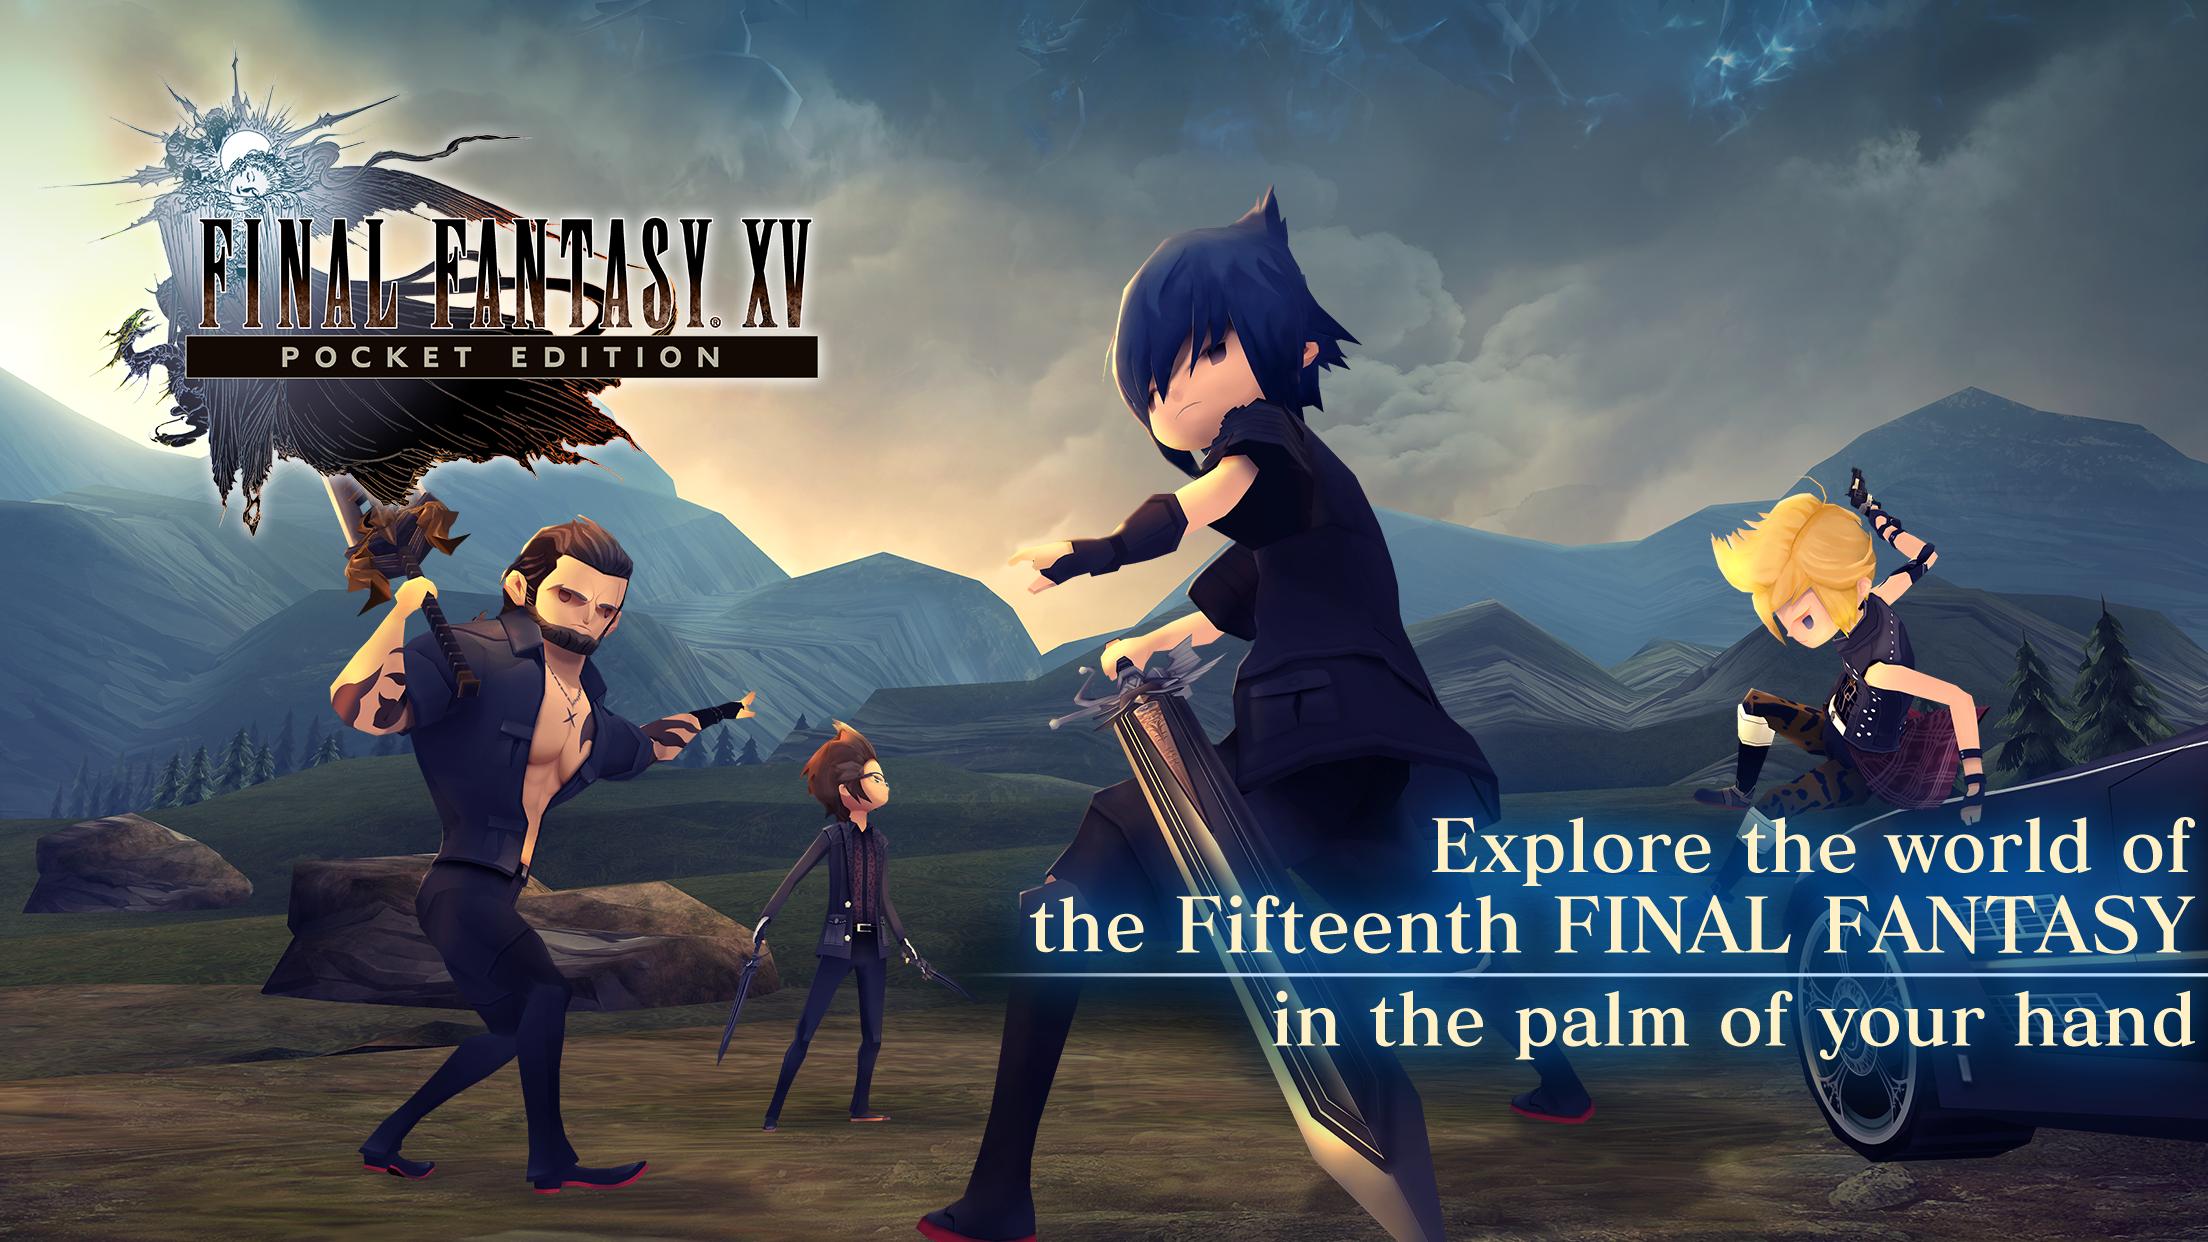 FINAL FANTASY XV POCKET EDITION for Android - APK Download - 